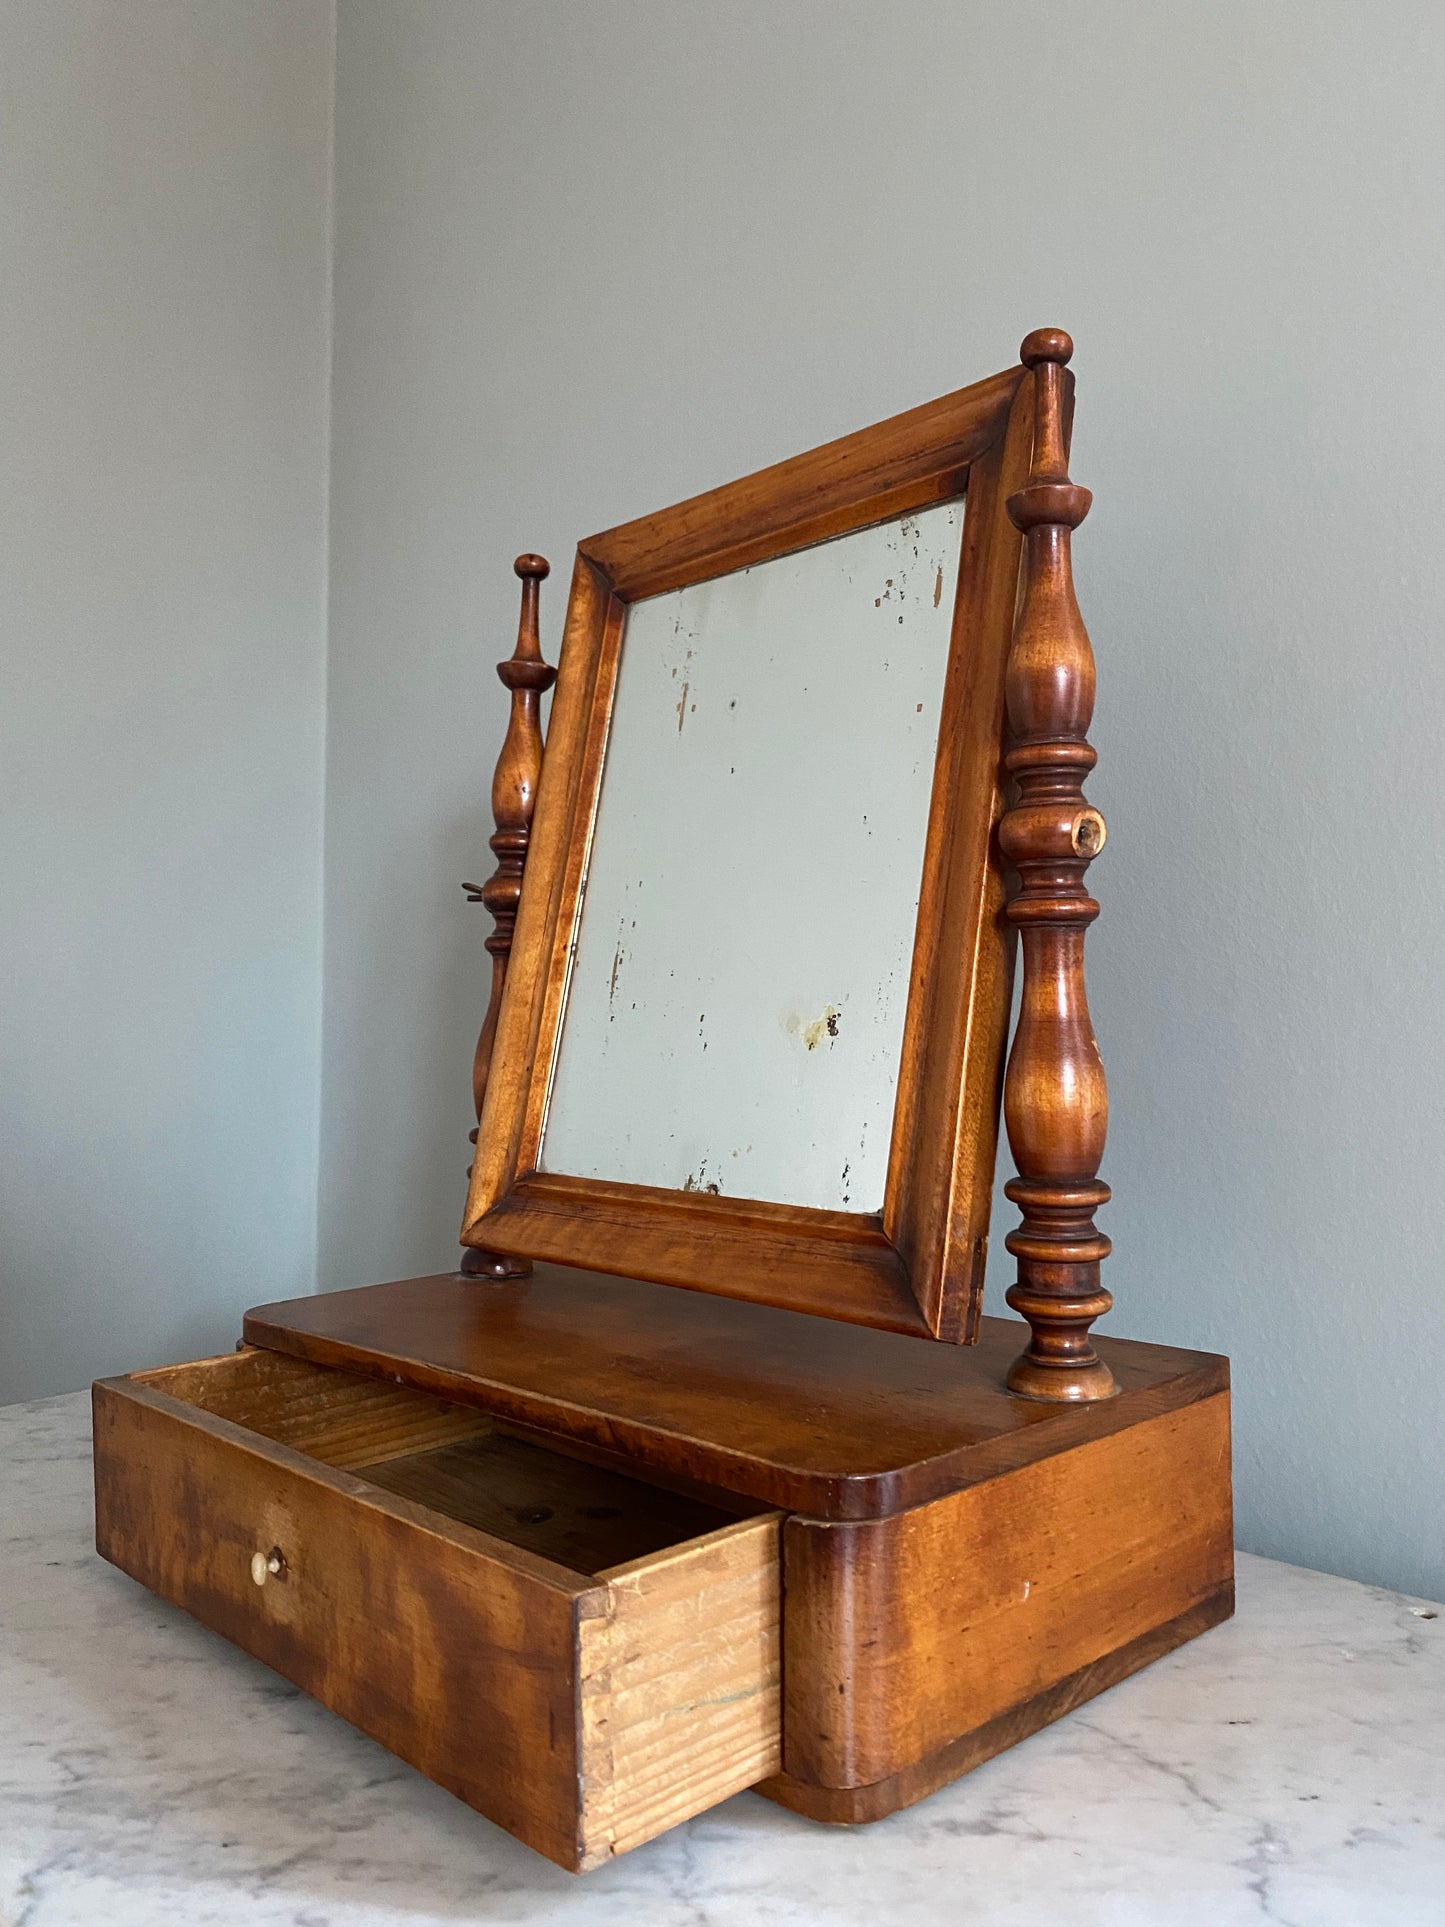 Early 20th century swing mirror with drawer